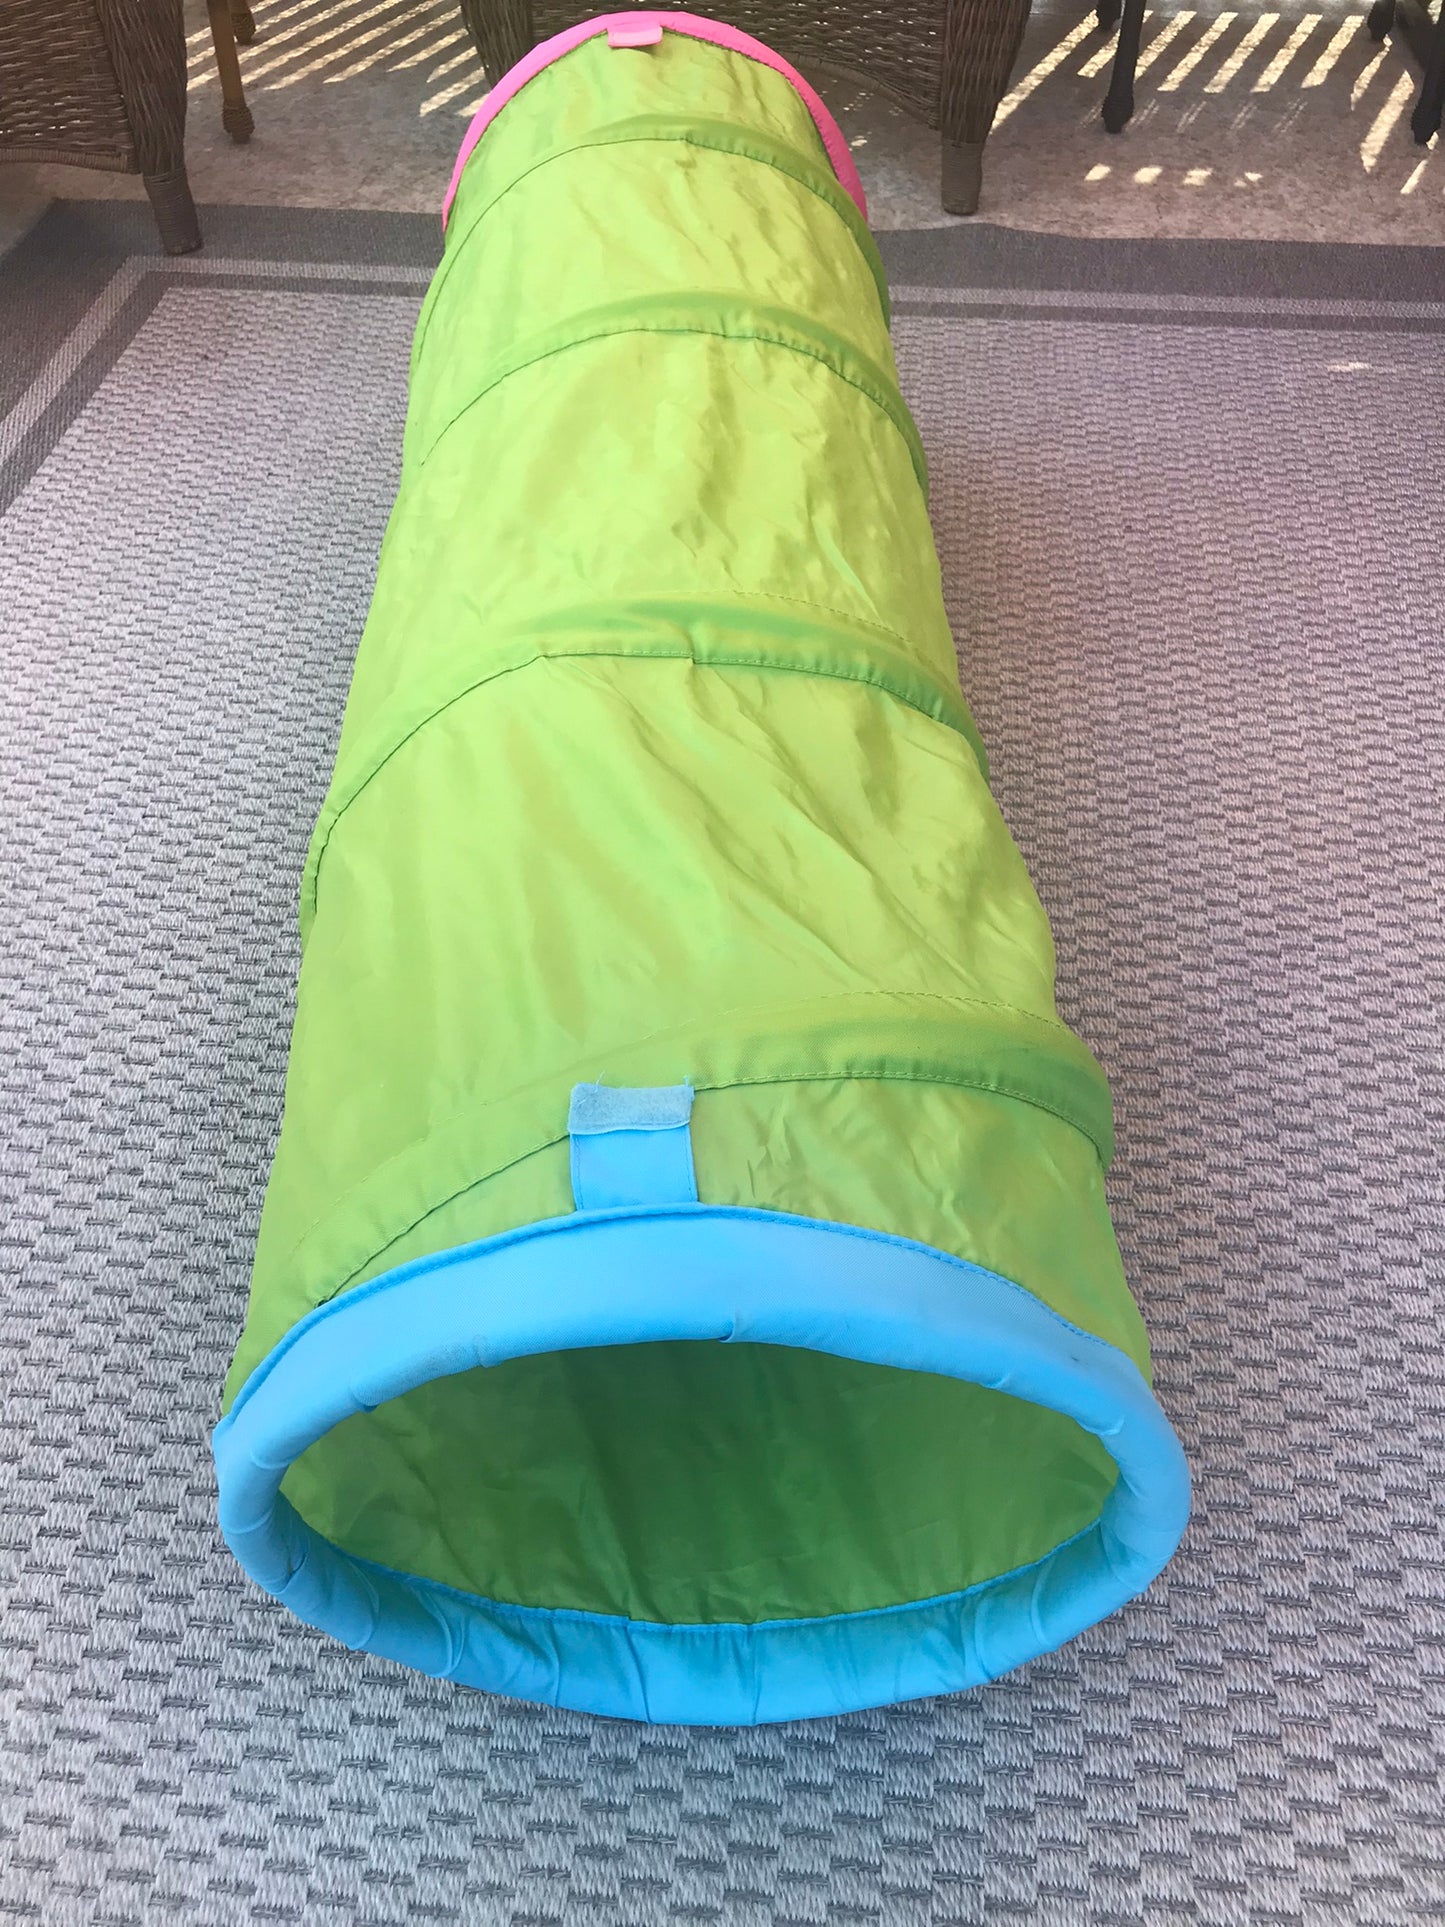 IKEA BUSA Play Tunnel, Heavy Duty, 5 Ft Long 16 inch Wide Collapsible for Easy Storage, Cats, Dogs, Toddlers Children Excellent